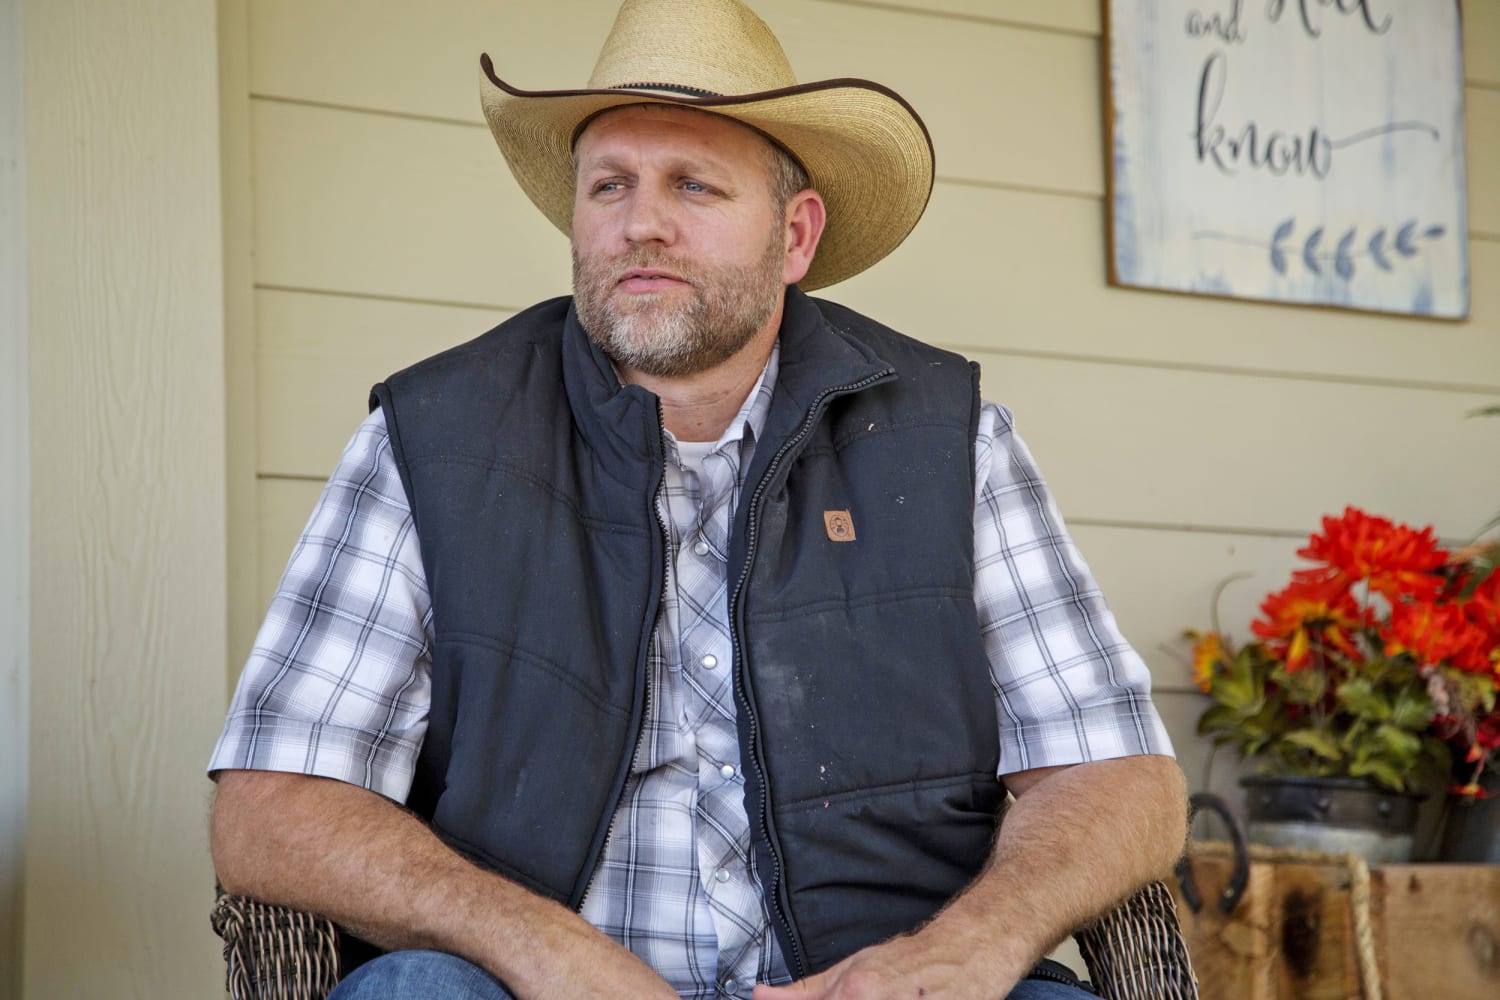 Noted anti-government activist Ammon Bundy running for governor of Idaho